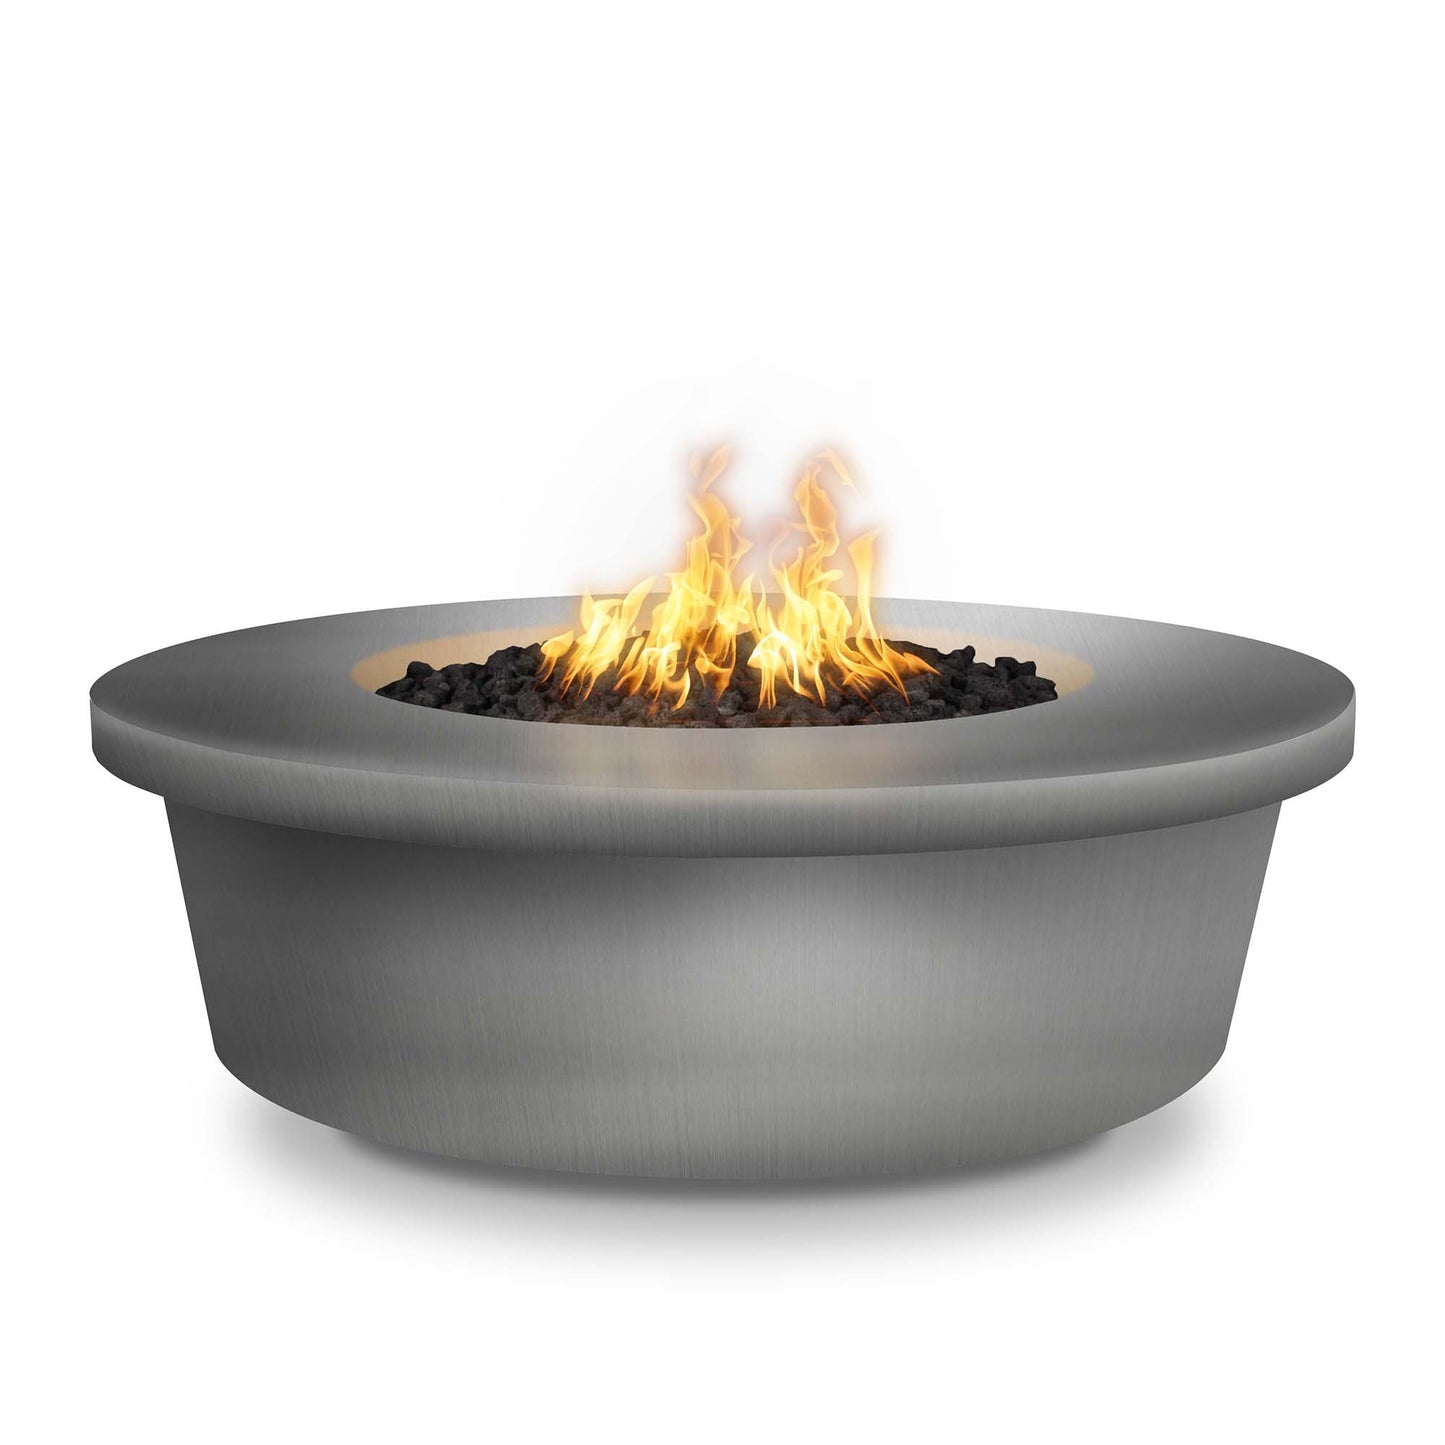 The Outdoor Plus Round Tempe 48" Hammered Copper Liquid Propane Fire Pit with 110V Electronic Ignition